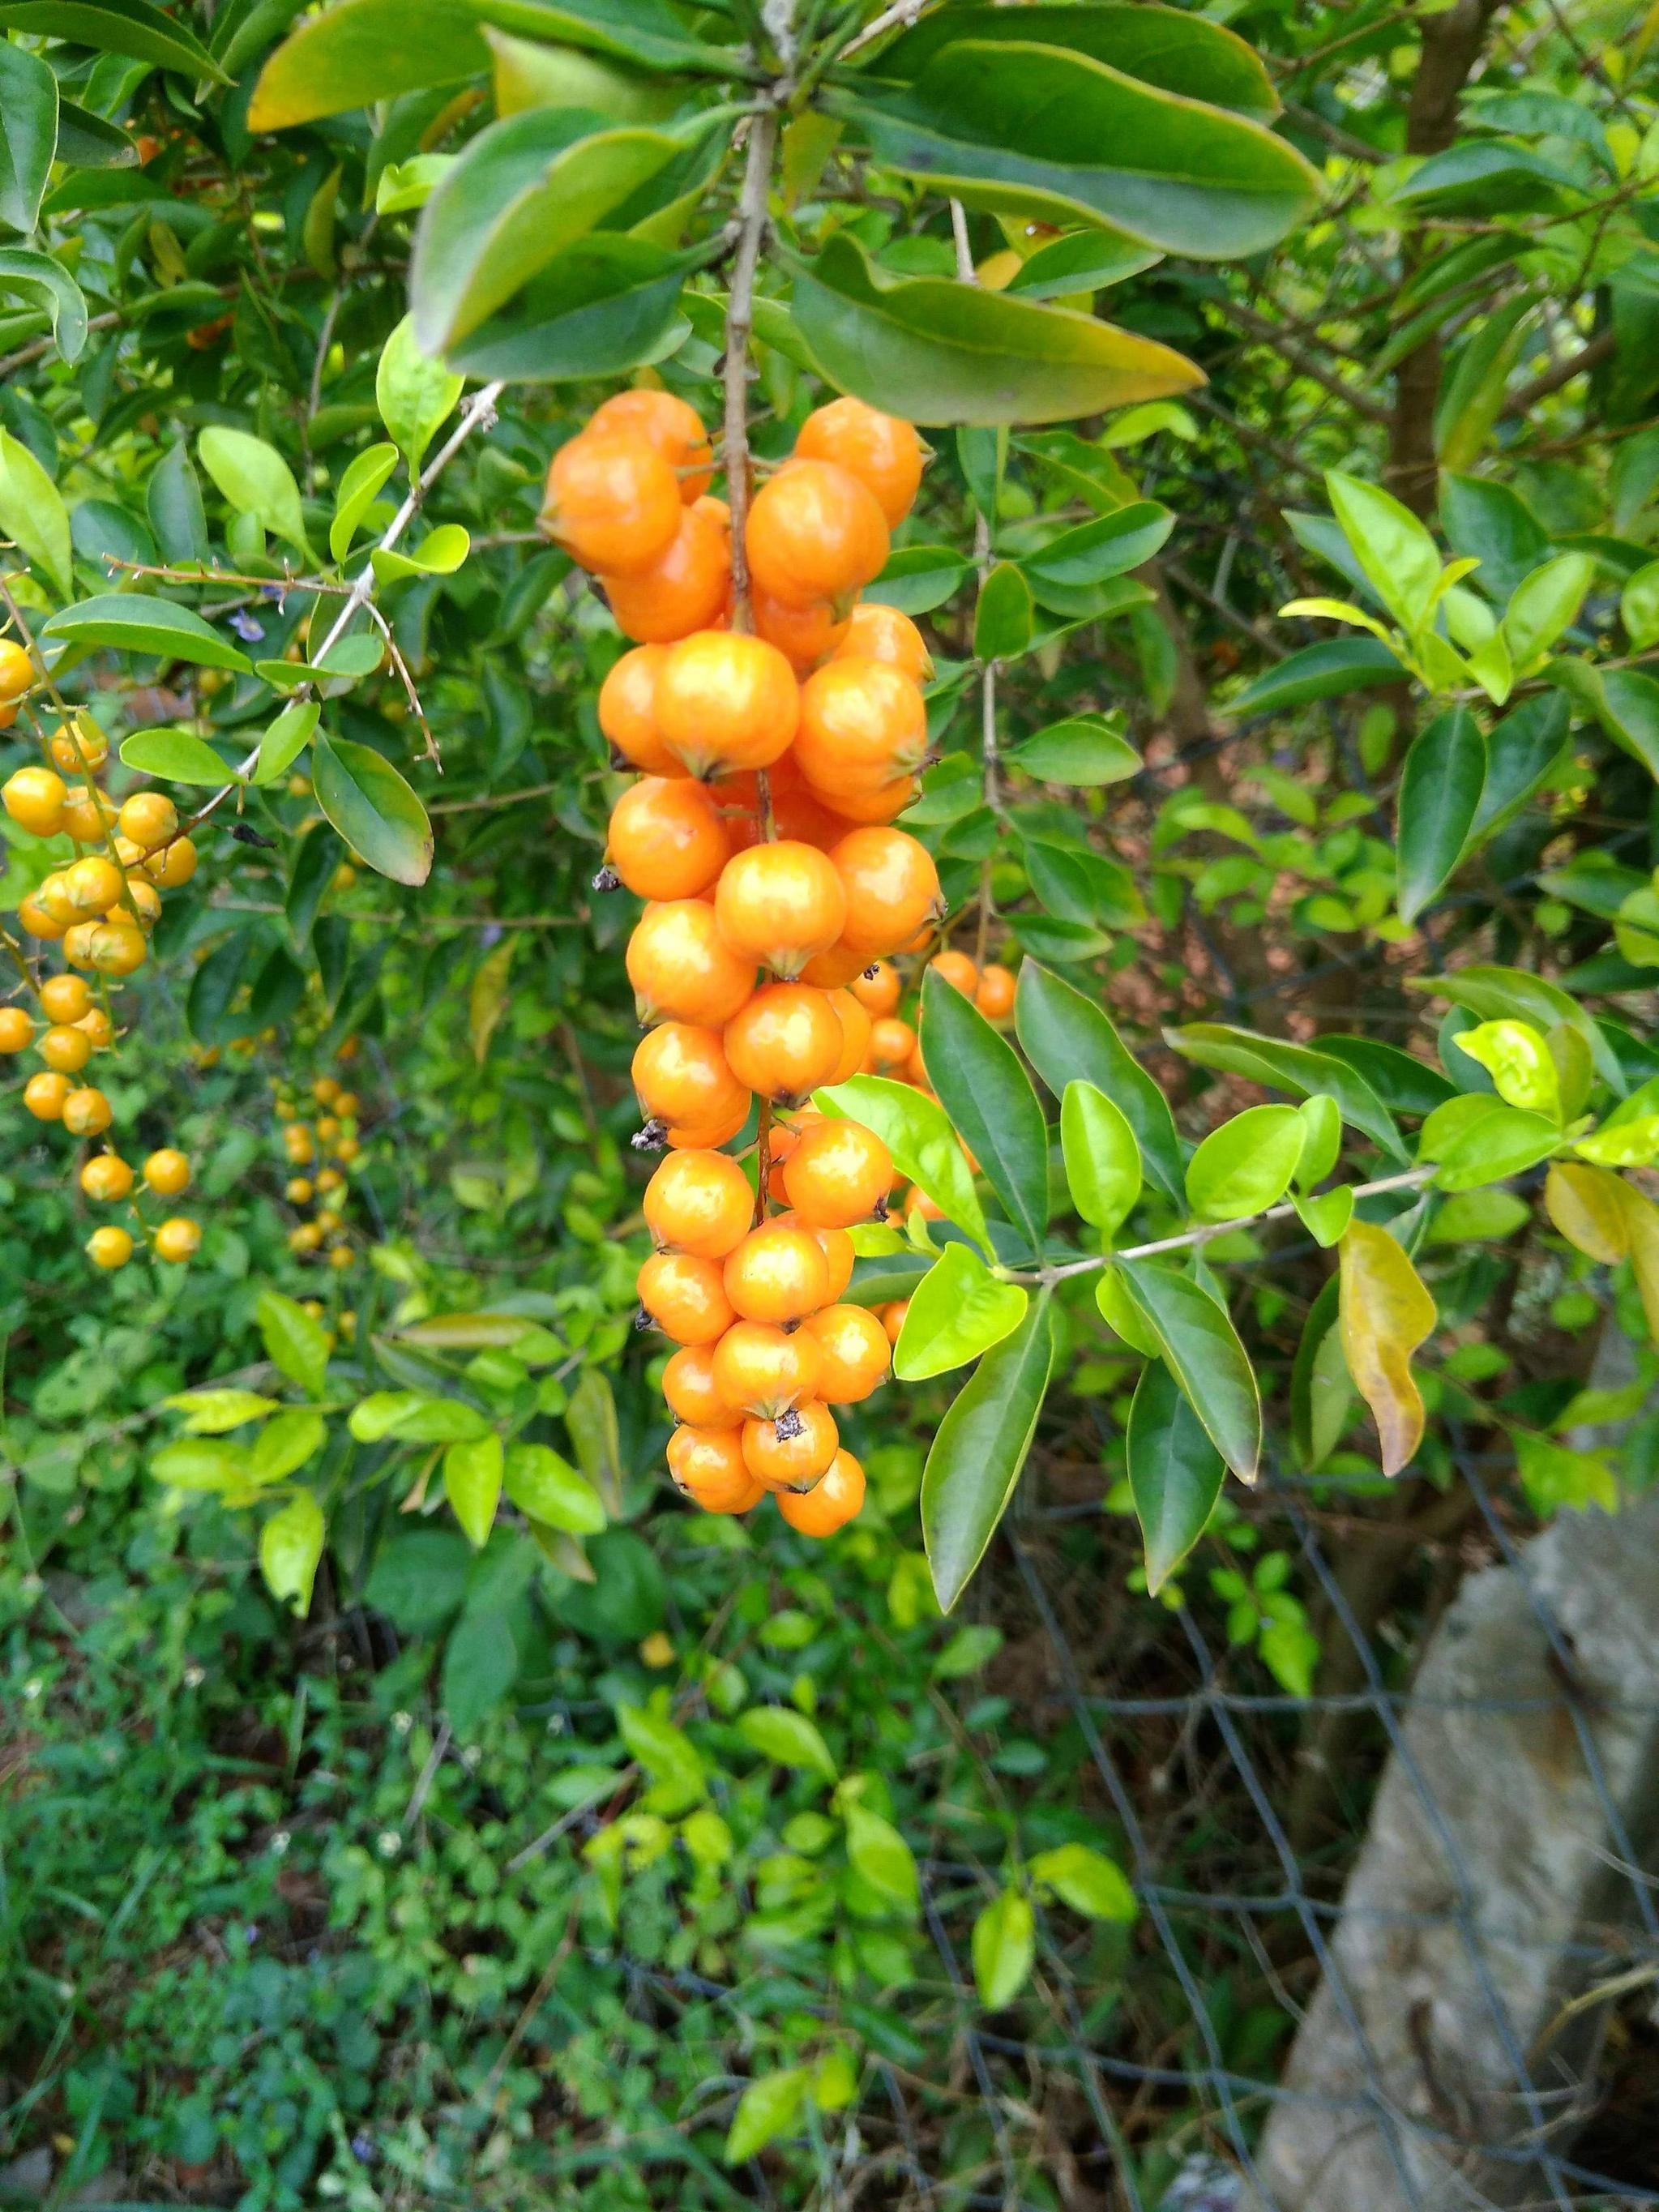 botany - What is the name of this plant with orange fruit clusters ...